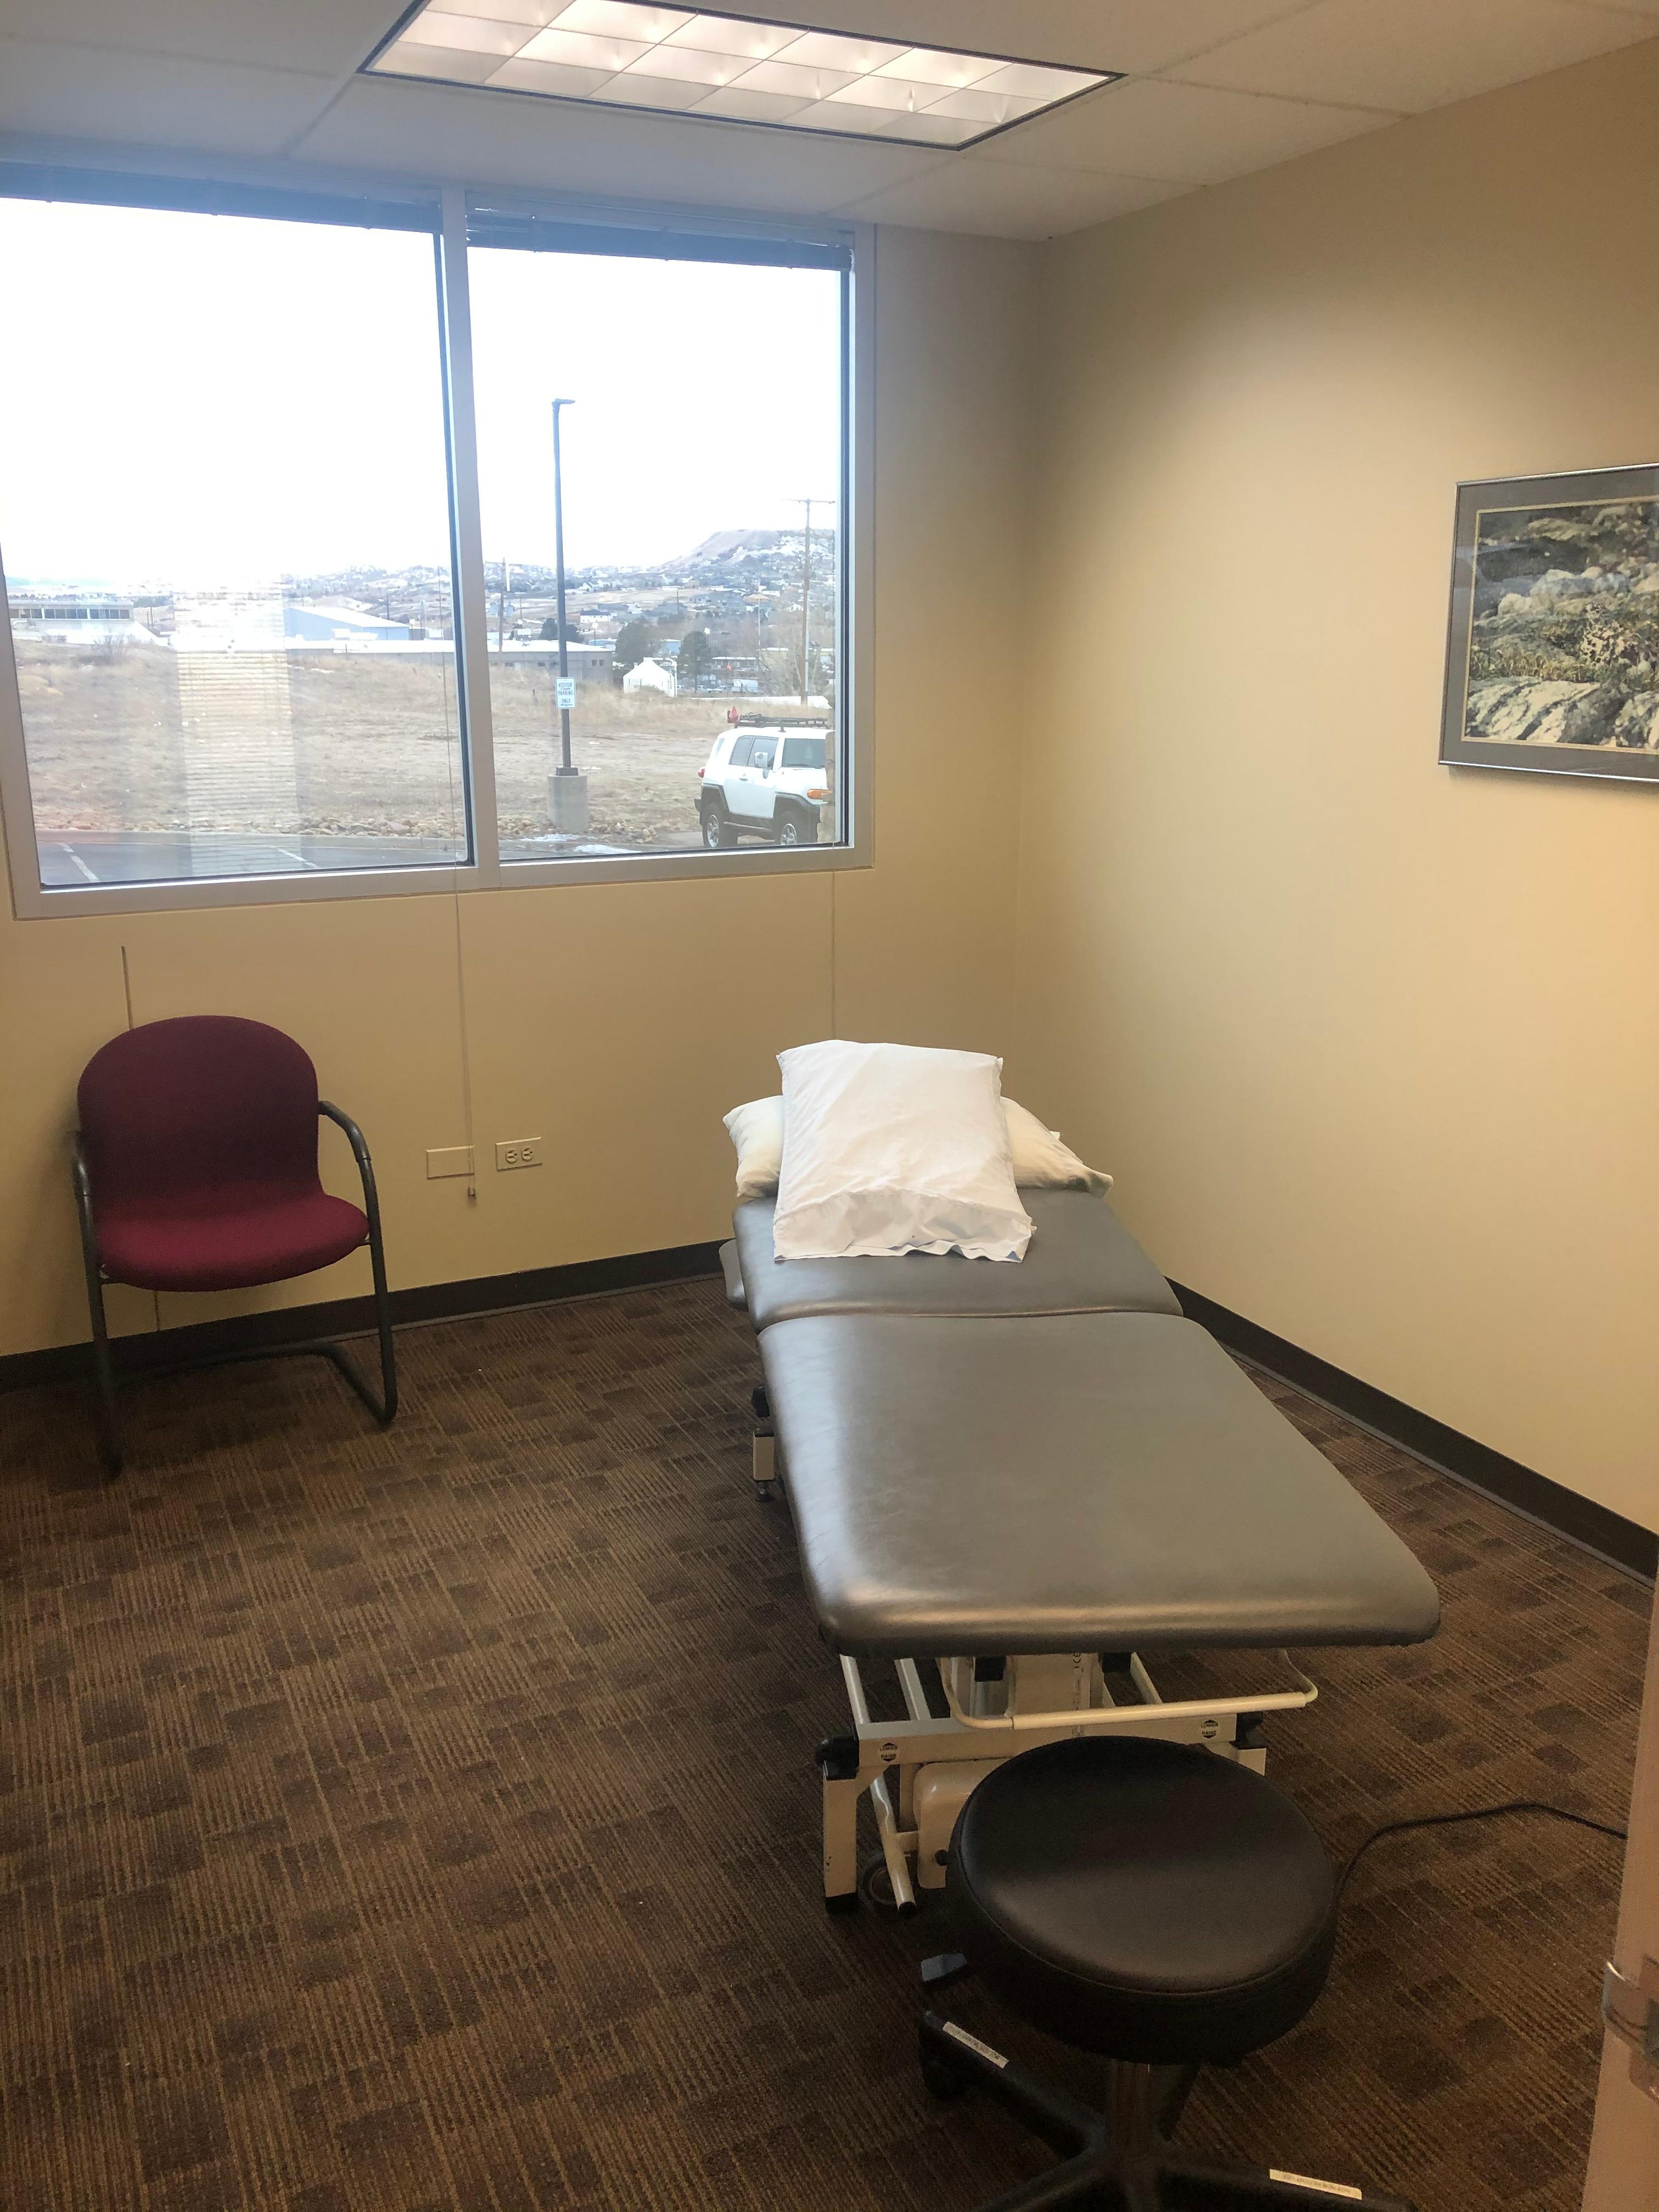 Pro Active Physical Therapy and Sports Medicine
900 W Castleton Rd
Castle Rock